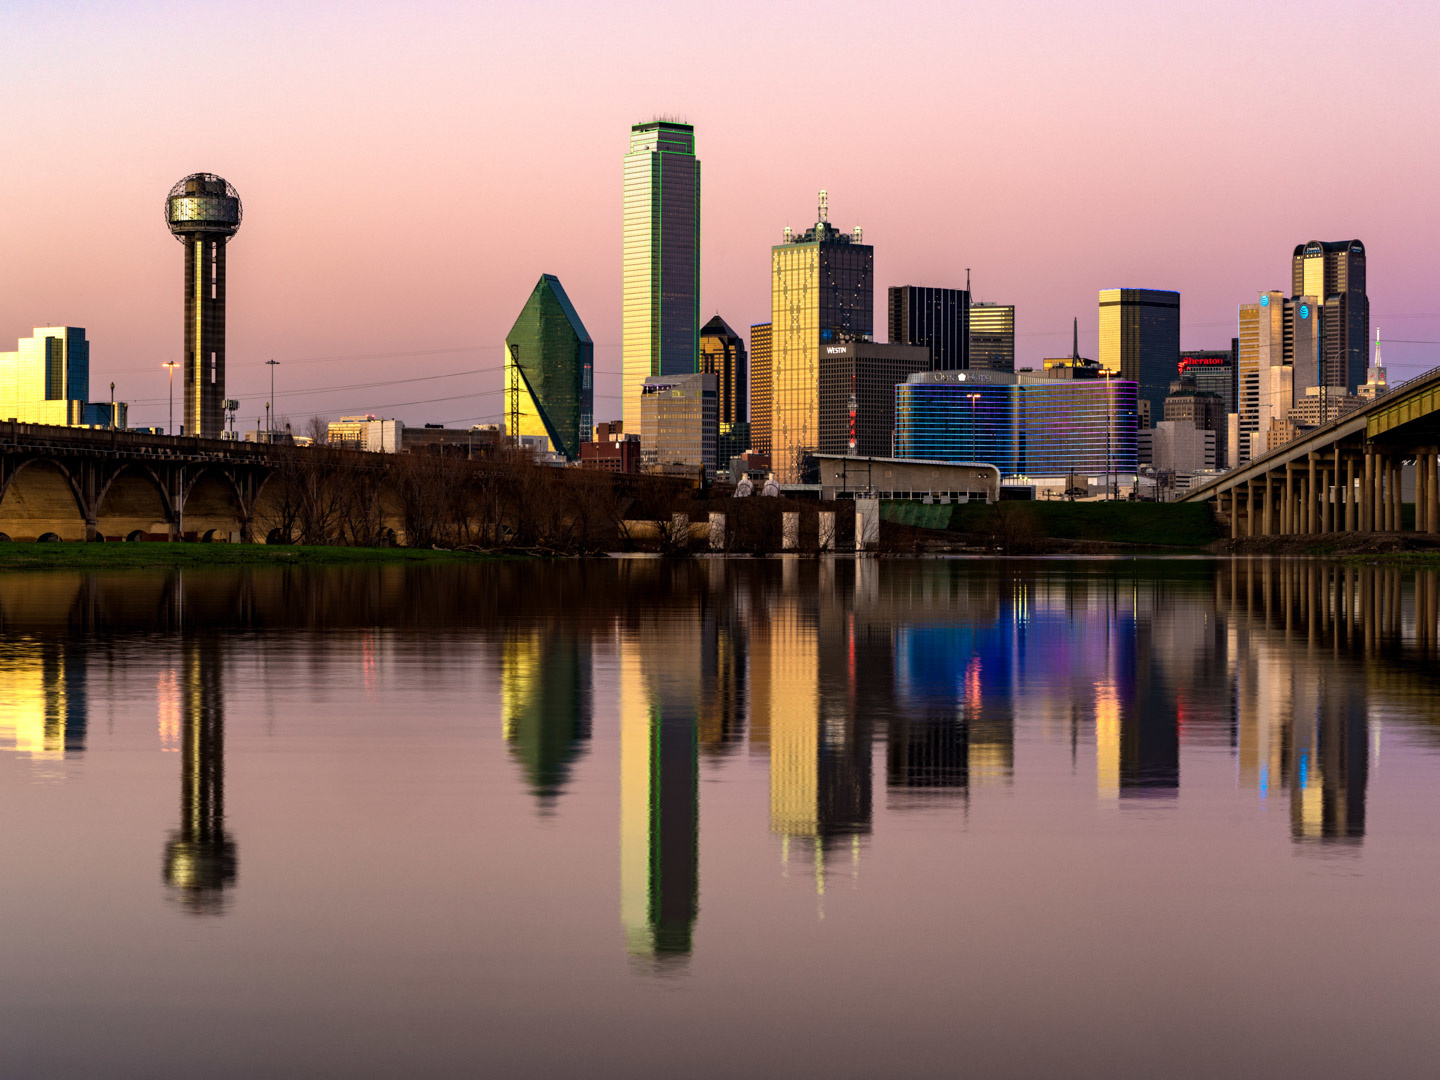 8 Pictures of Dallas After the Rain